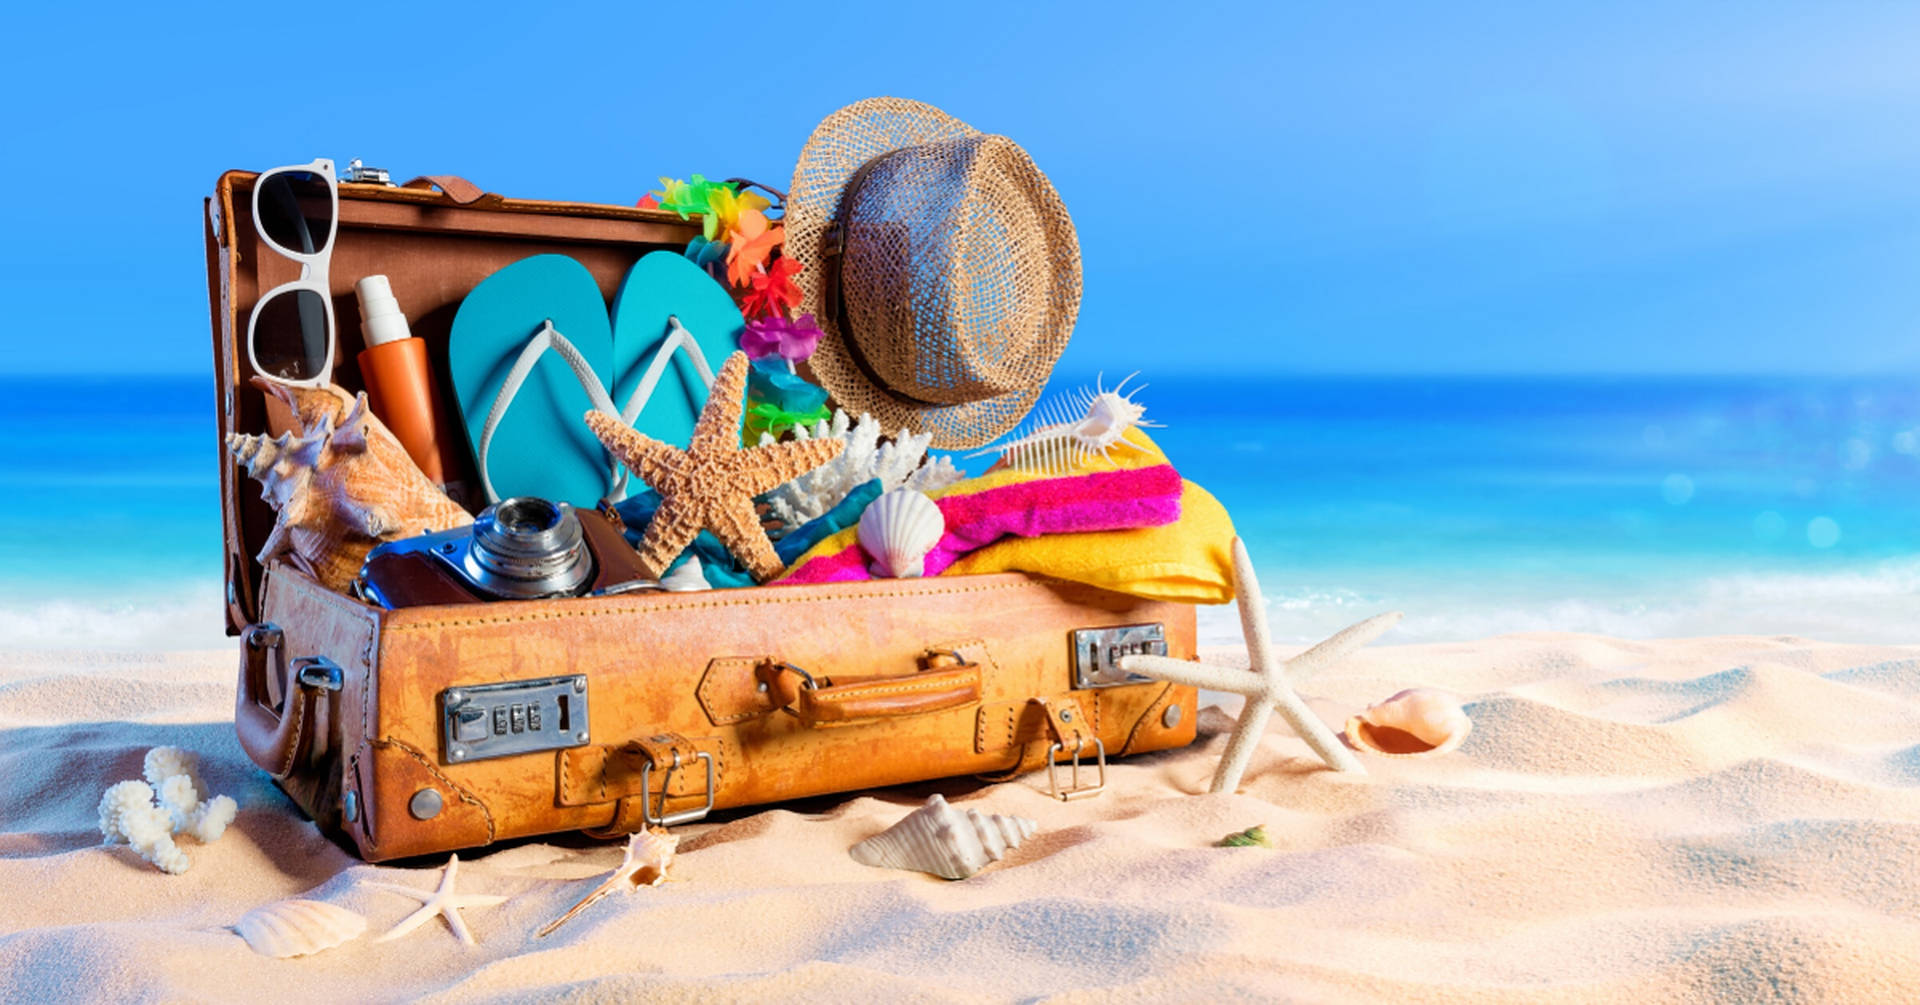 Suitcase For Beach Vacation Wallpaper